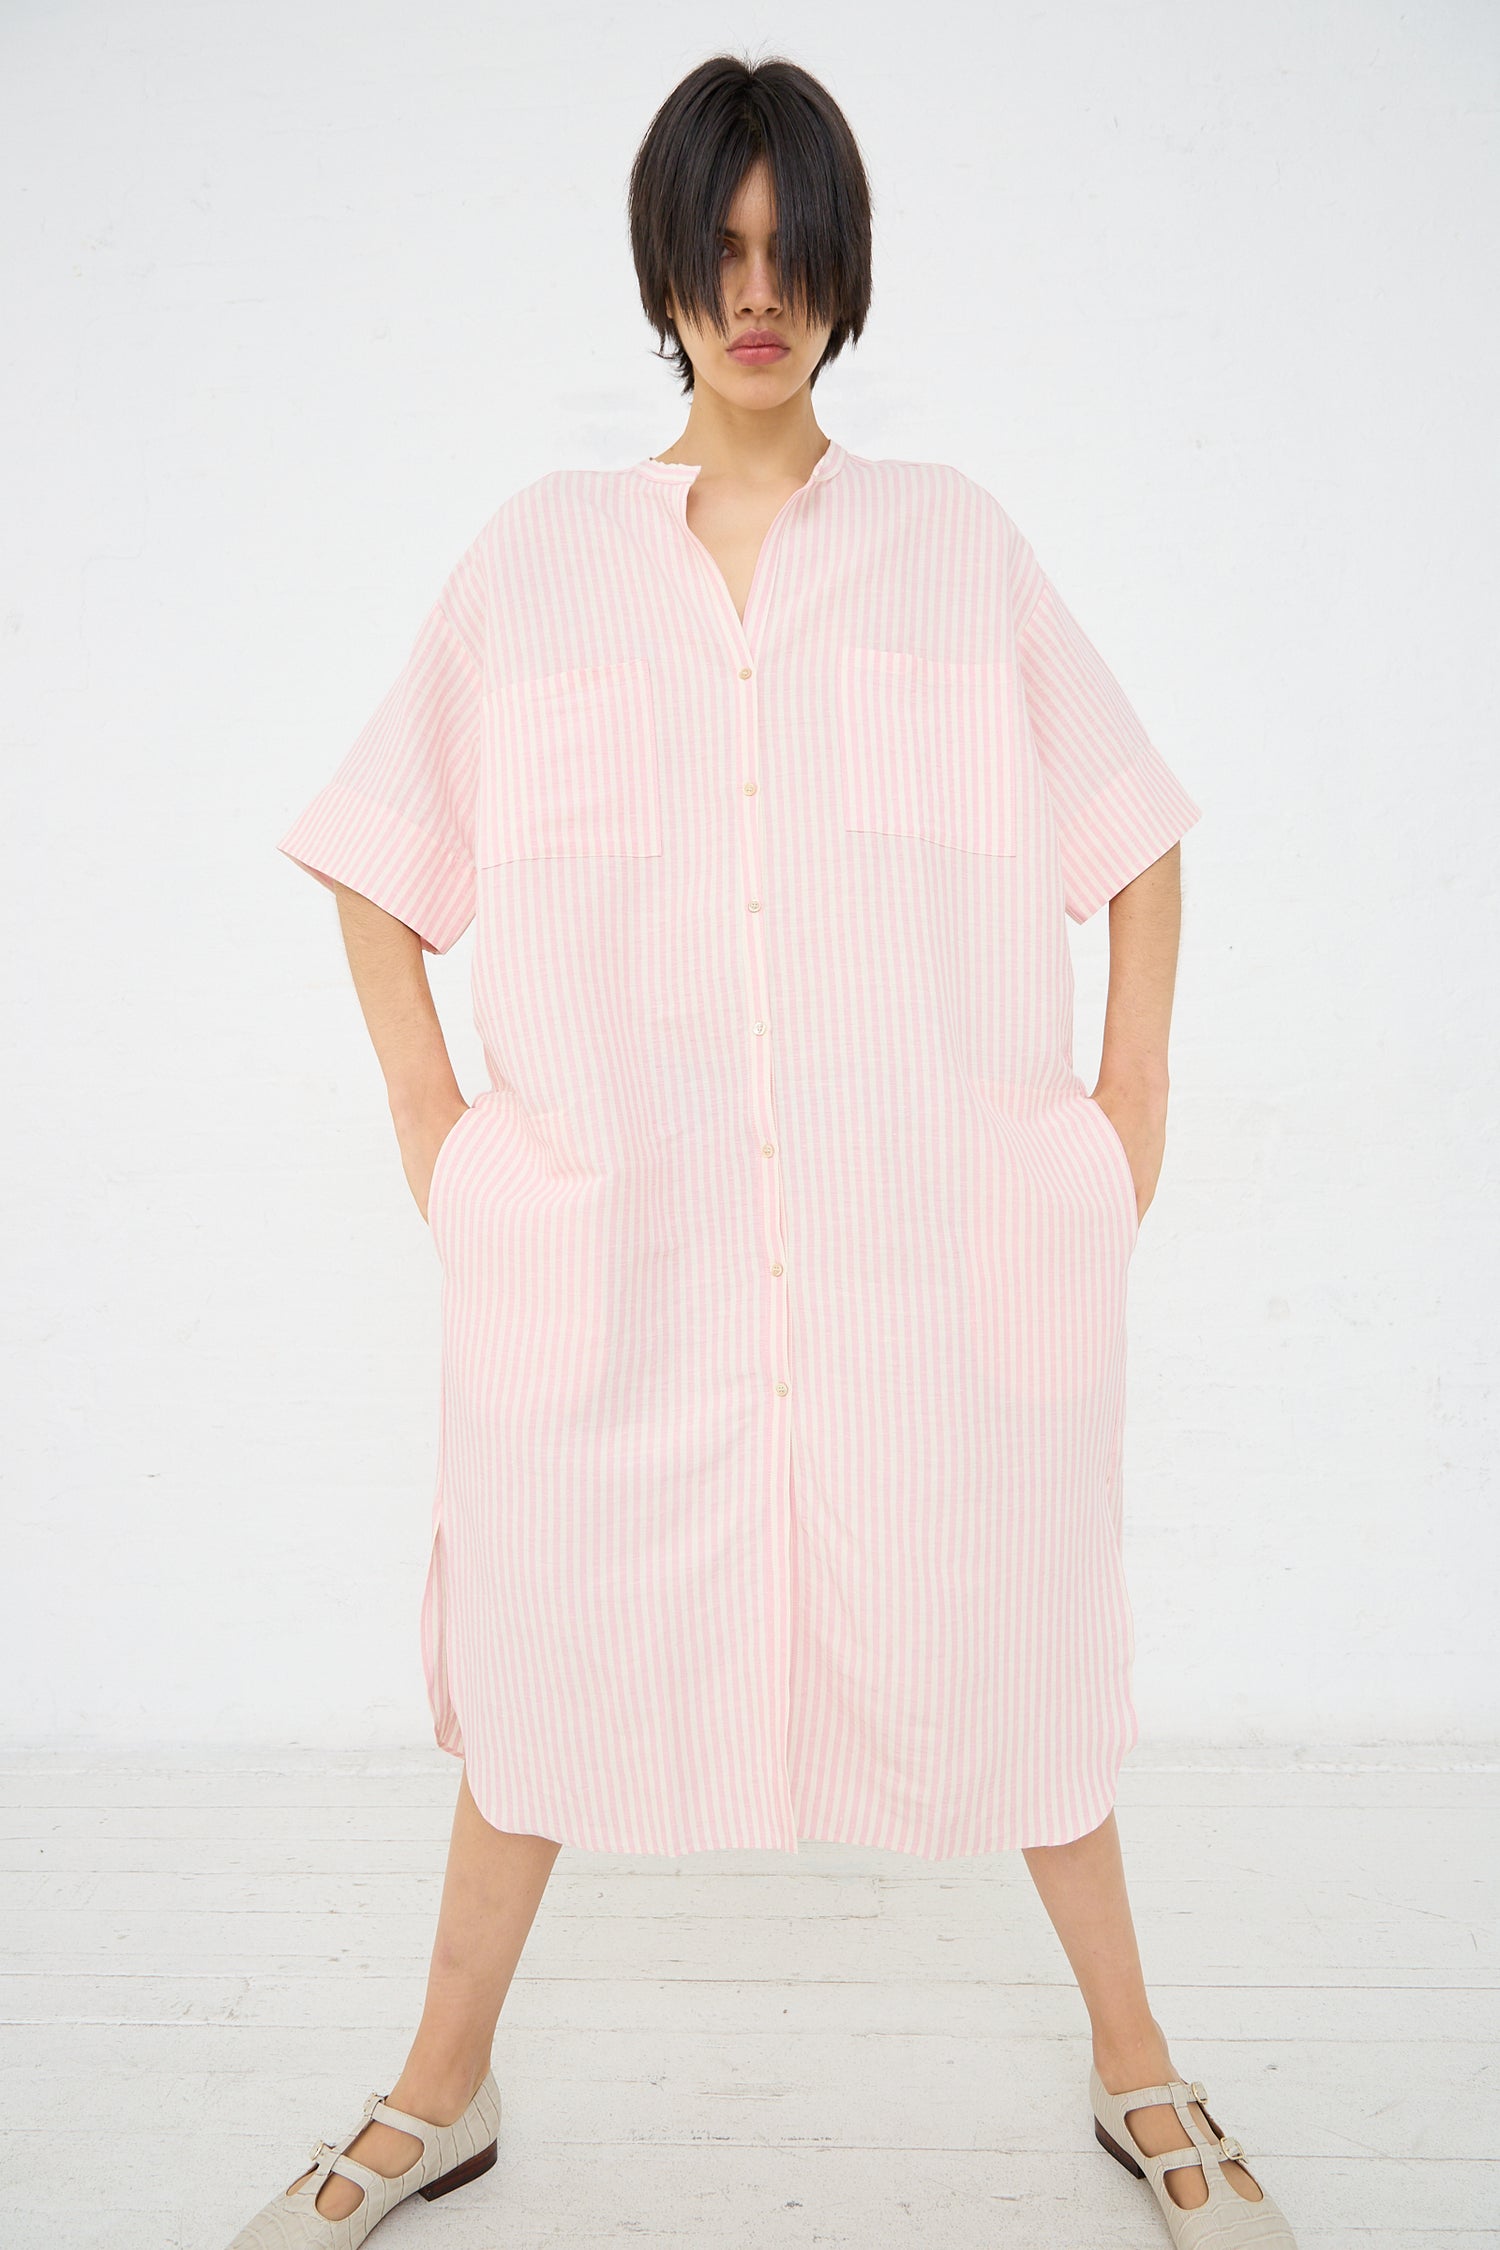 Woman in an oversized Caron Callahan Linen Stripe Kalloni Dress in Pink standing against a white background.